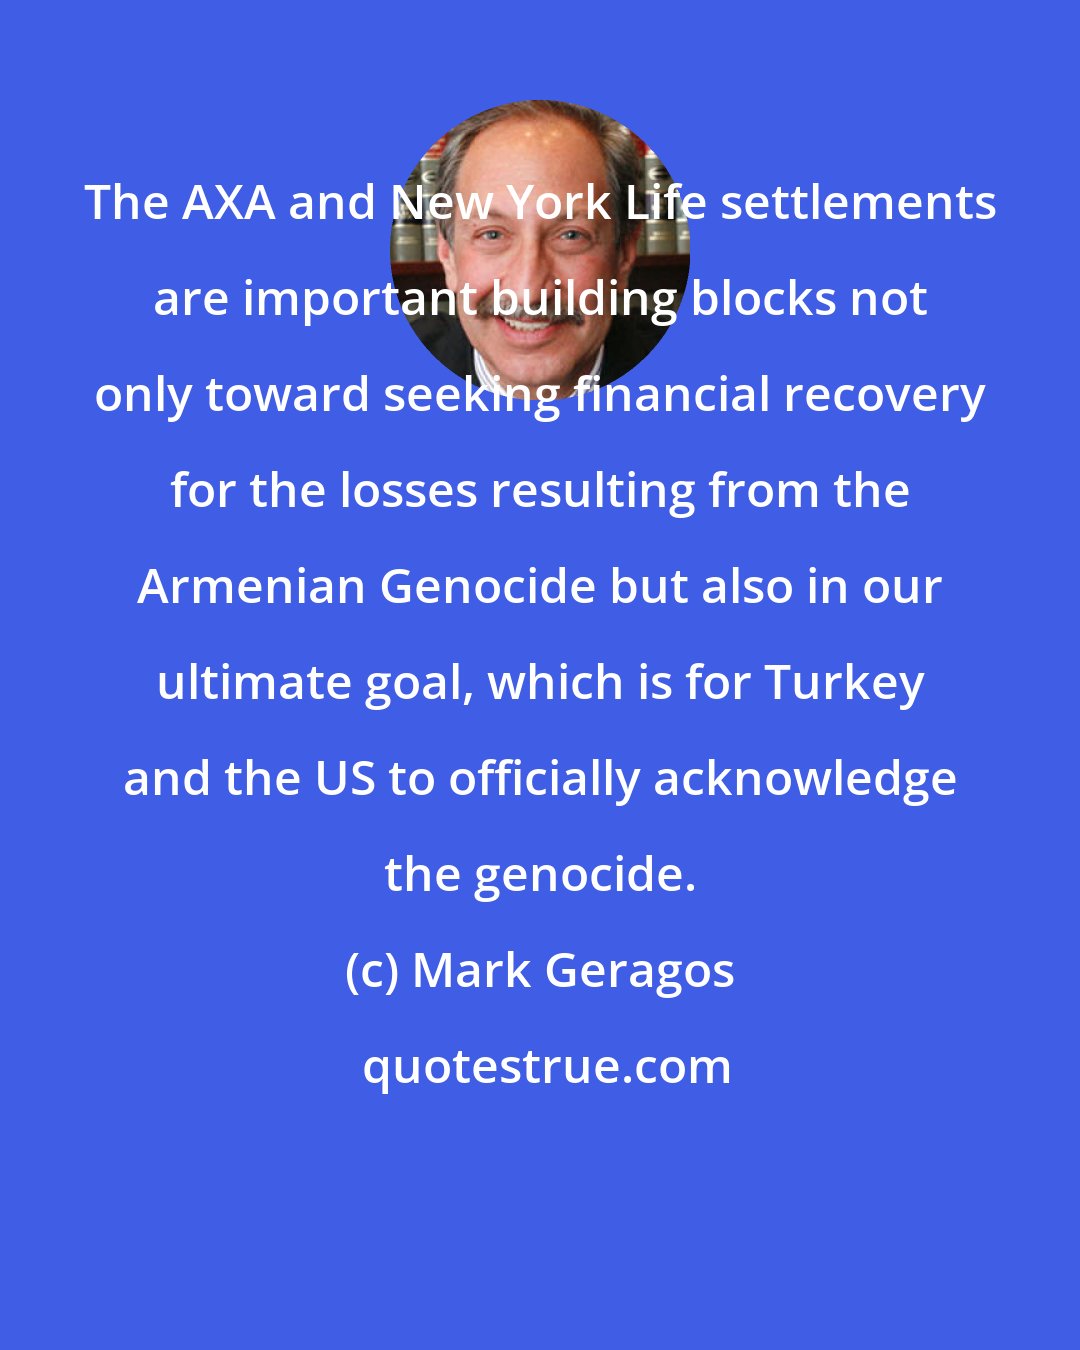 Mark Geragos: The AXA and New York Life settlements are important building blocks not only toward seeking financial recovery for the losses resulting from the Armenian Genocide but also in our ultimate goal, which is for Turkey and the US to officially acknowledge the genocide.